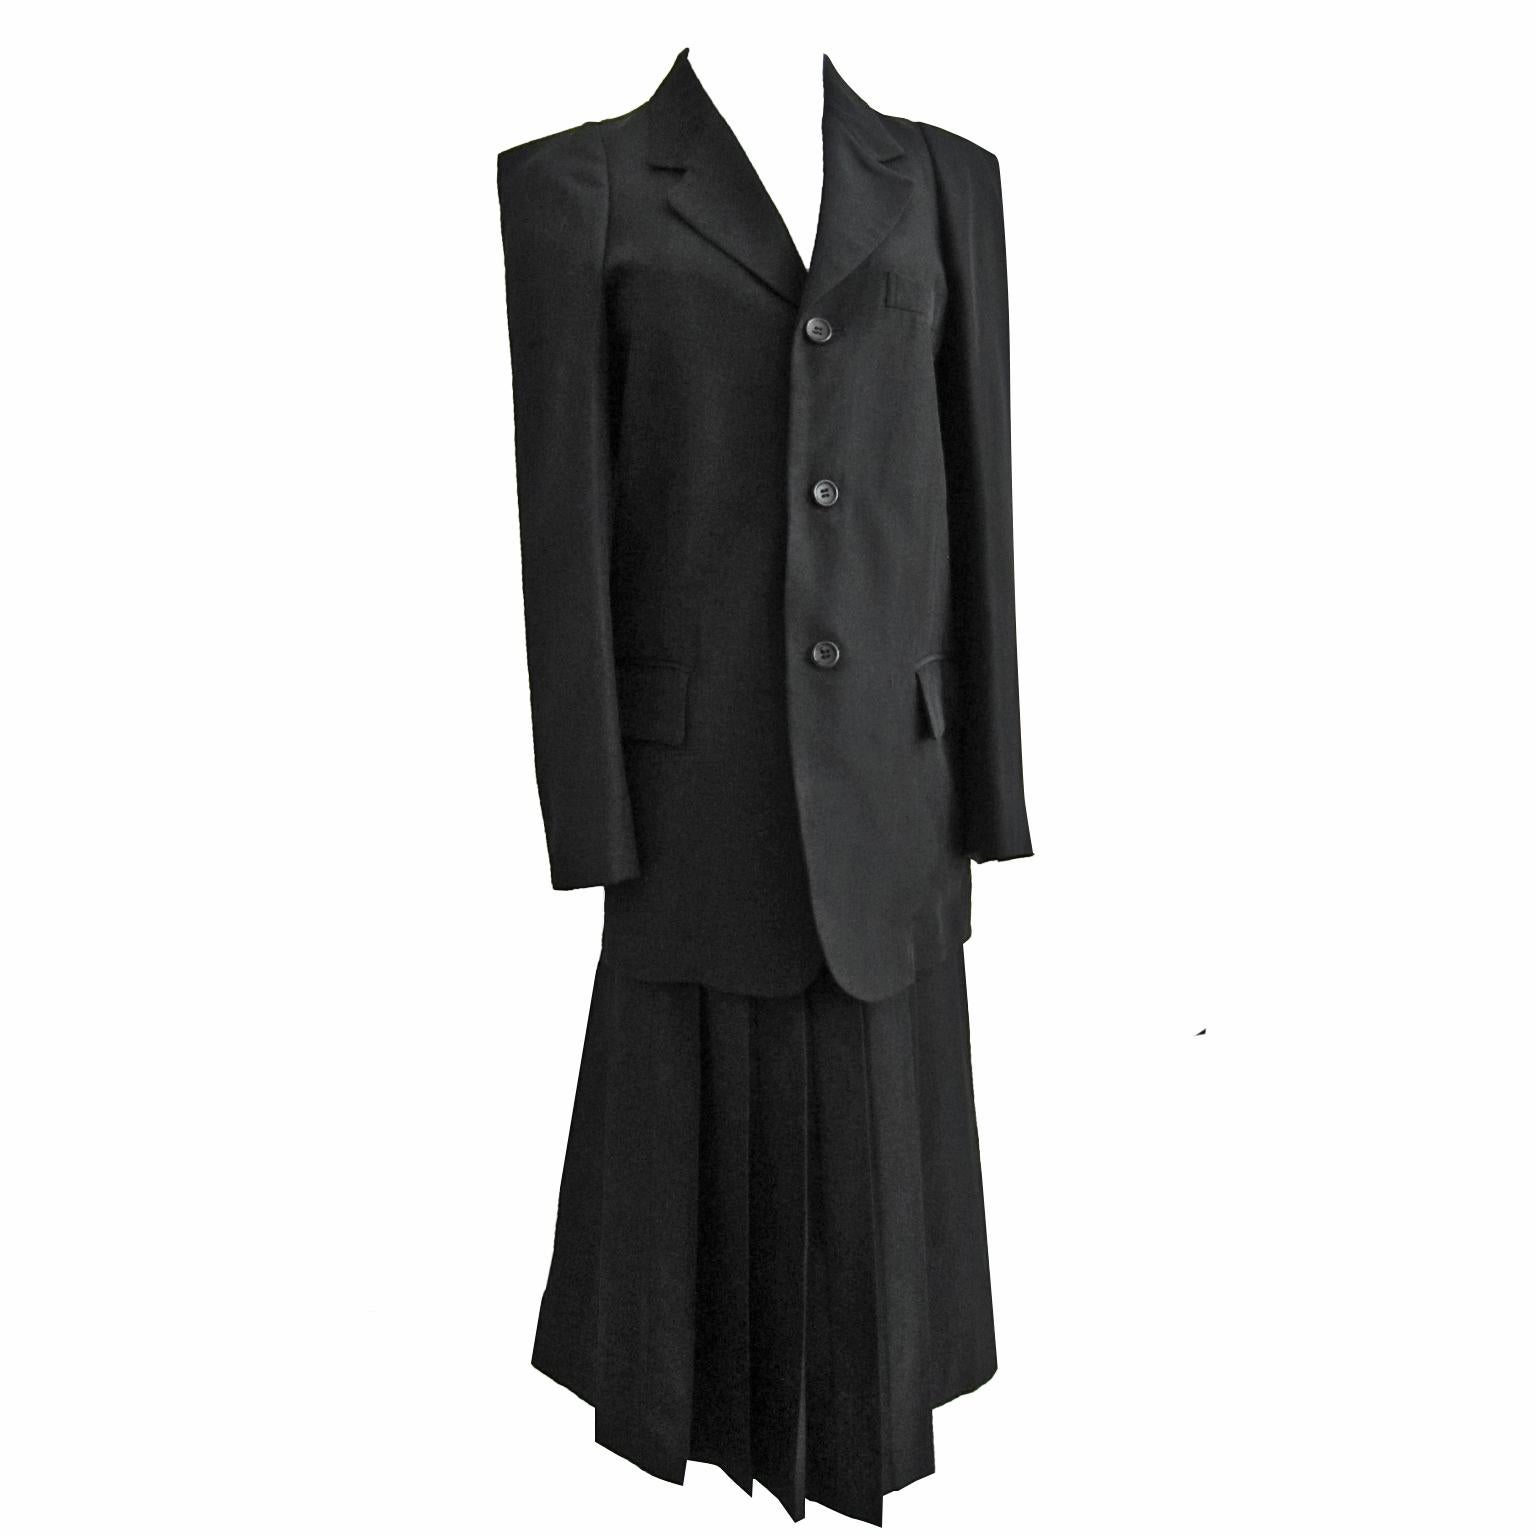 Comme des Garcons black three buttons jacket and skirt set from AD 1989.
Sleeves are constructed without shoulder pads.
Jacket size : M
Skirt : S 